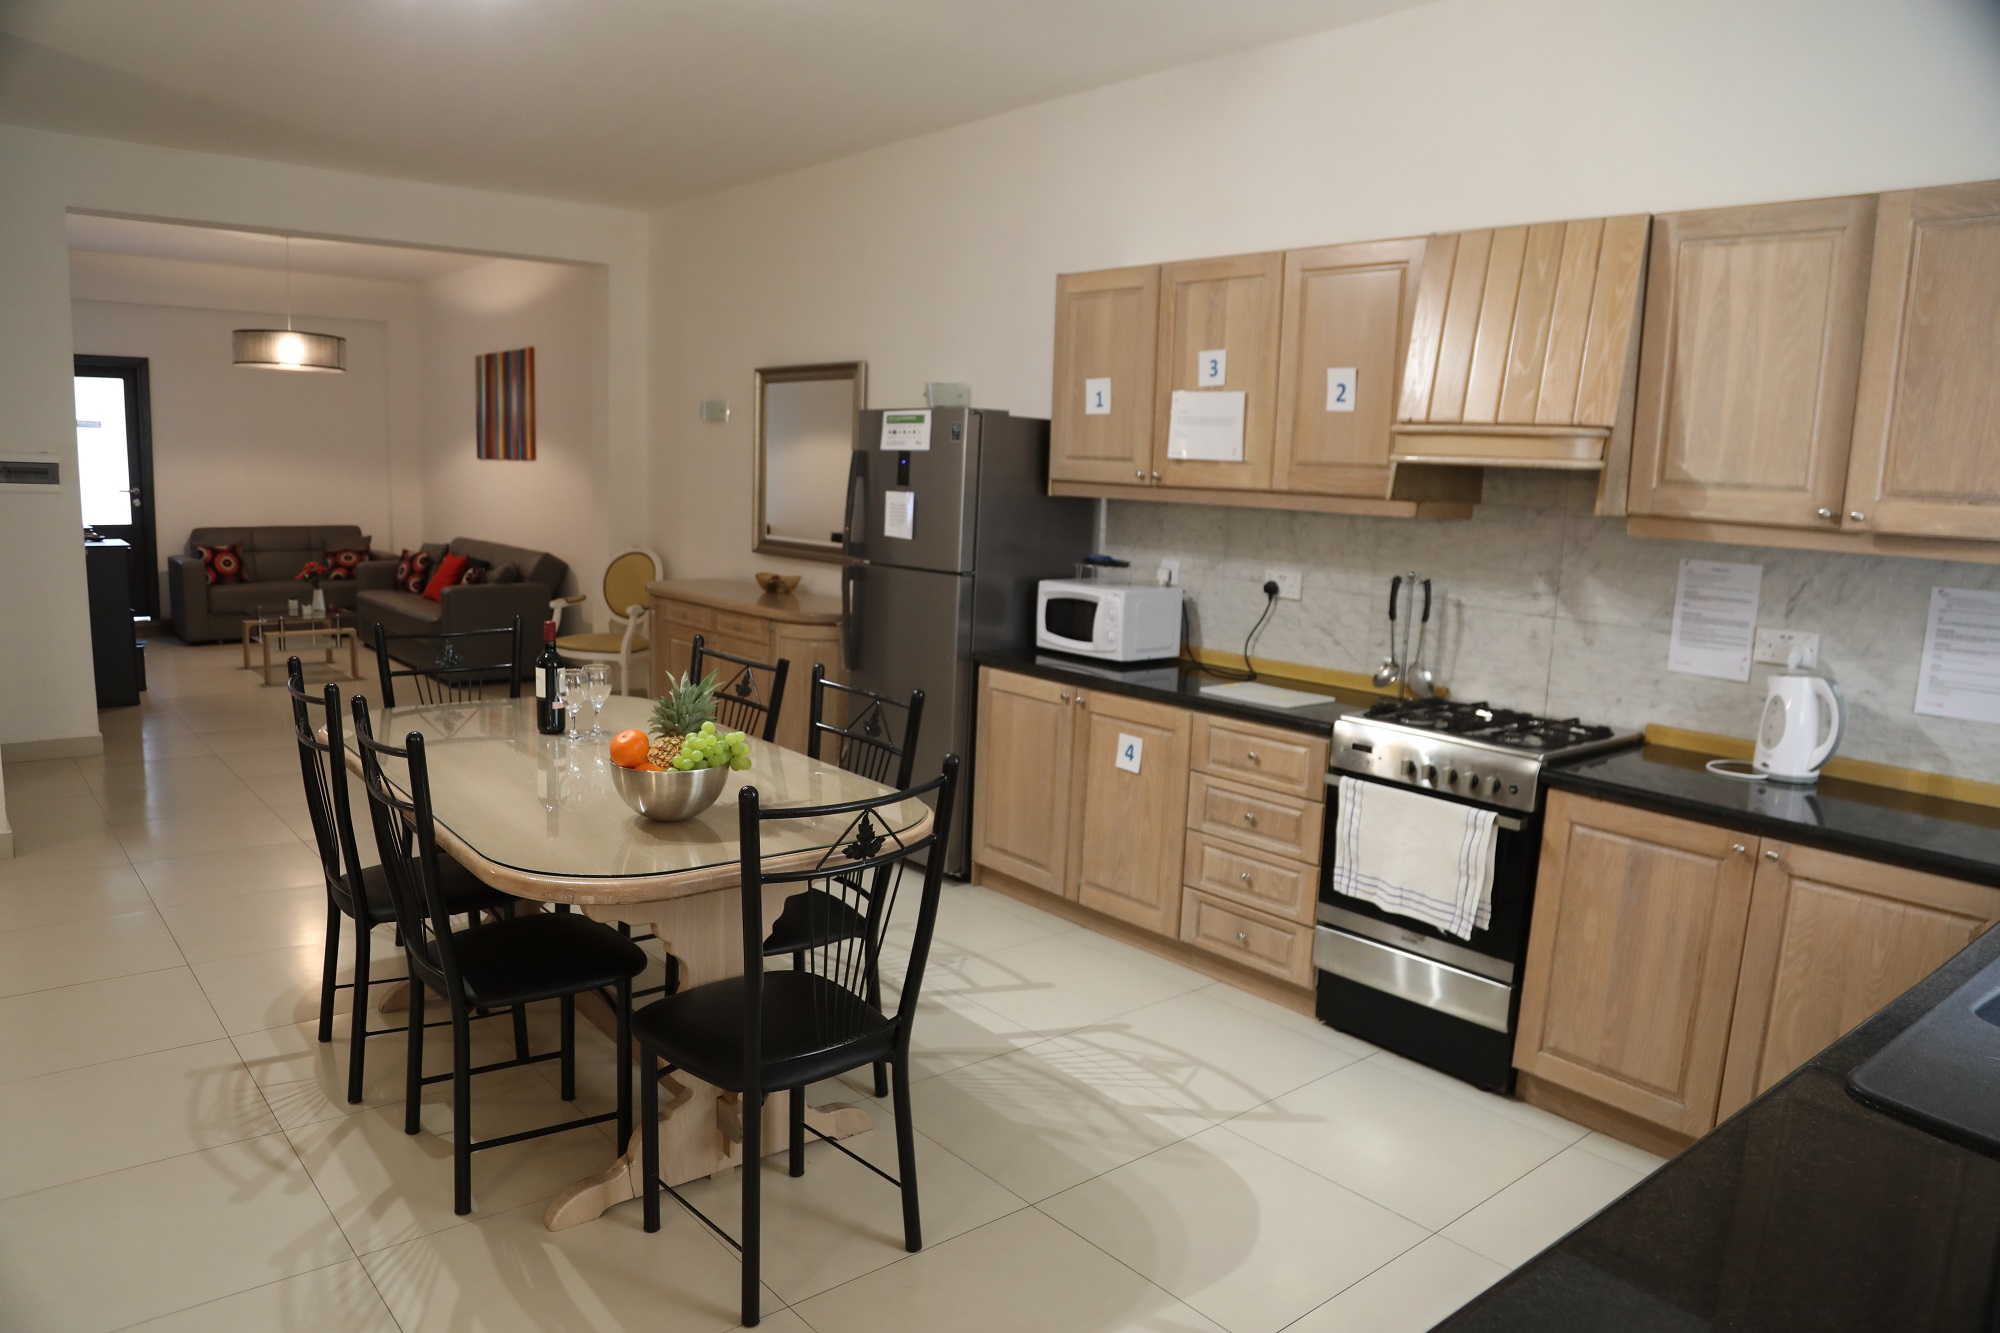 One of the shared kitchens at the residence in Gozo